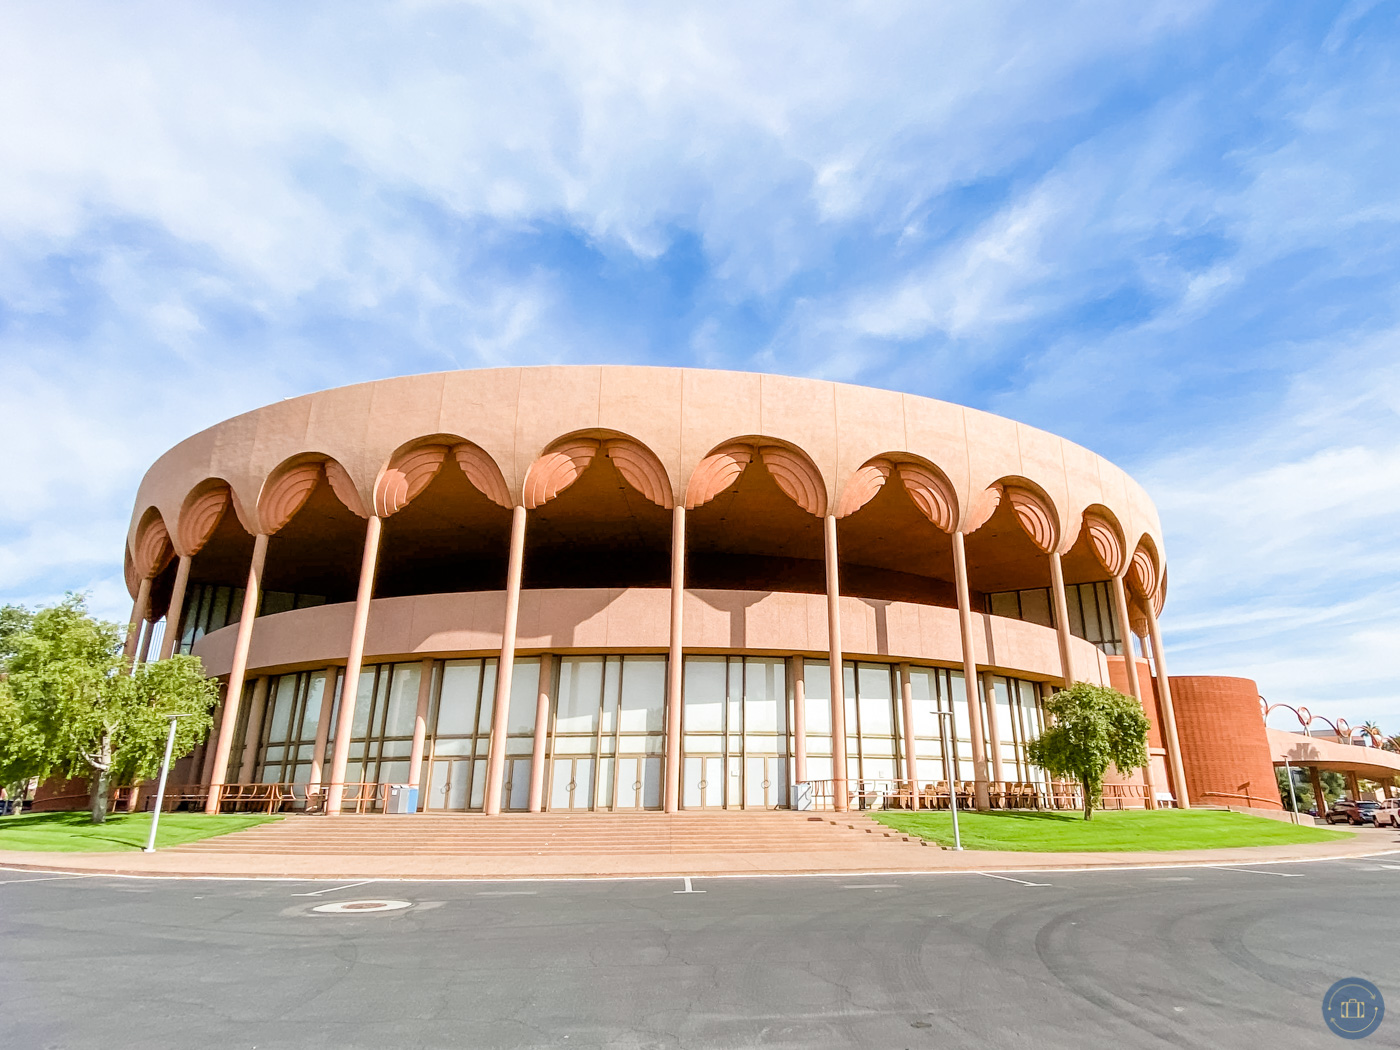 ASU gammage performing arts center in tempe designed by Frank Lloyd Wright